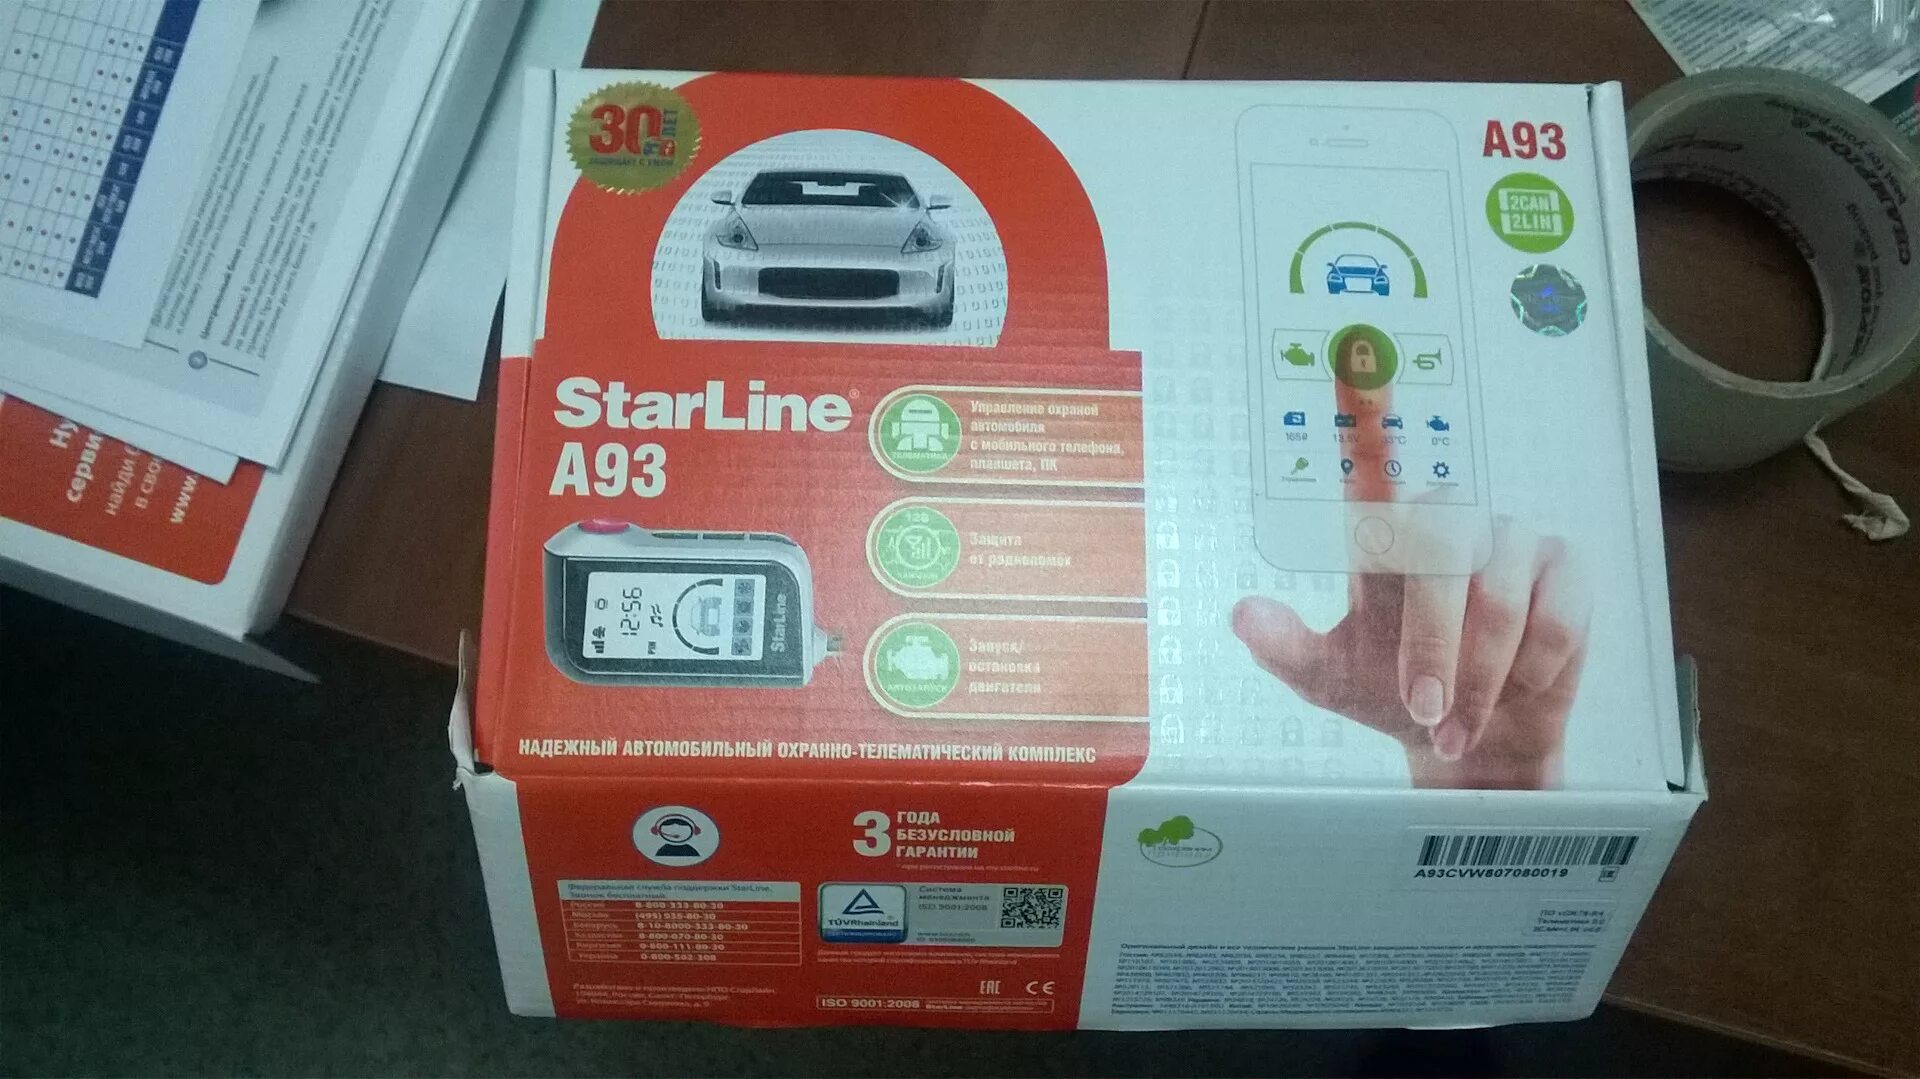 Starline a93 2can eco. Старлайн а 93 2 Кан 2 Лин. STARLINE a93 2can+2lin брелок. A93 2can 2lin набор. STARLINE 2can 2lin Drive 2.